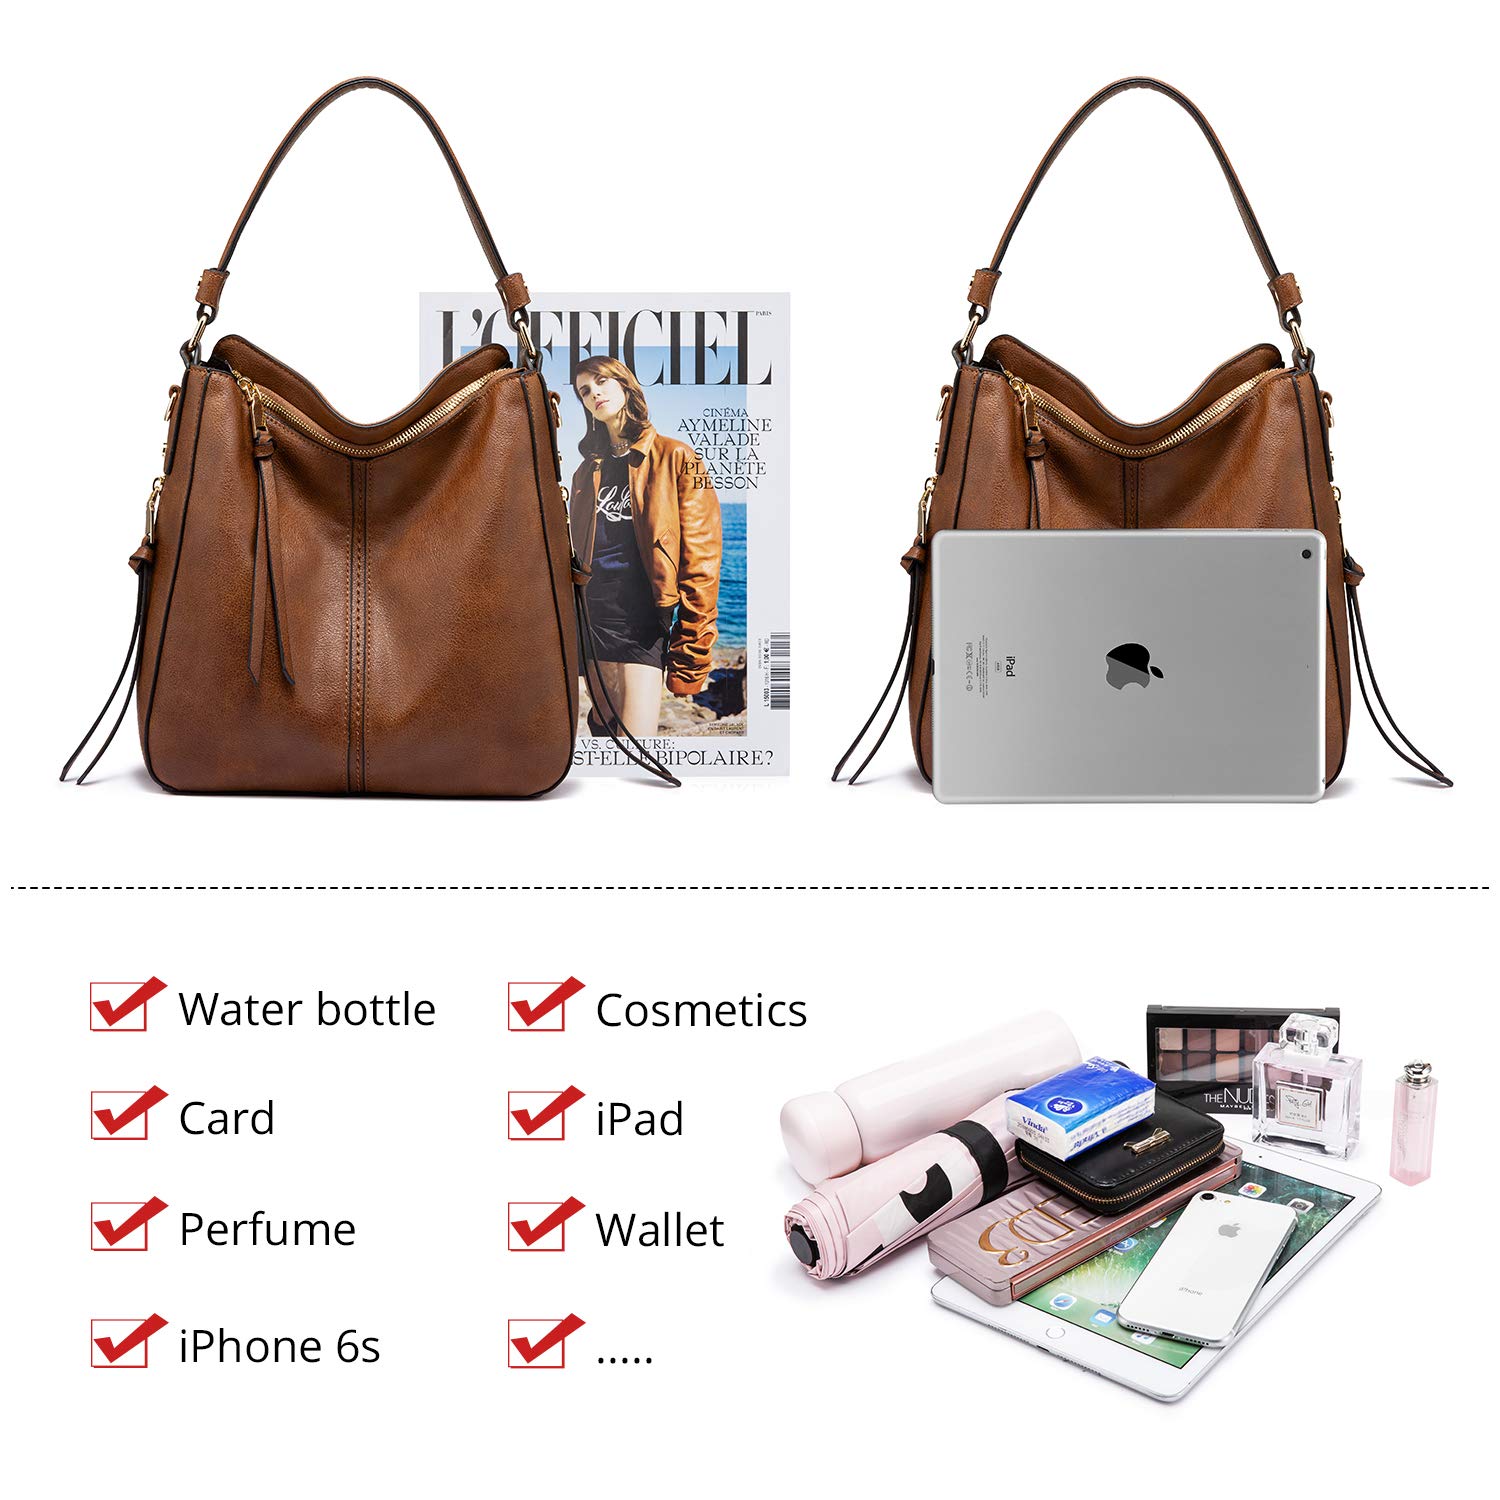 Realer Hobo Bags for Women Faux Leather Purses and Handbags Large Hobo Purse with Tassel